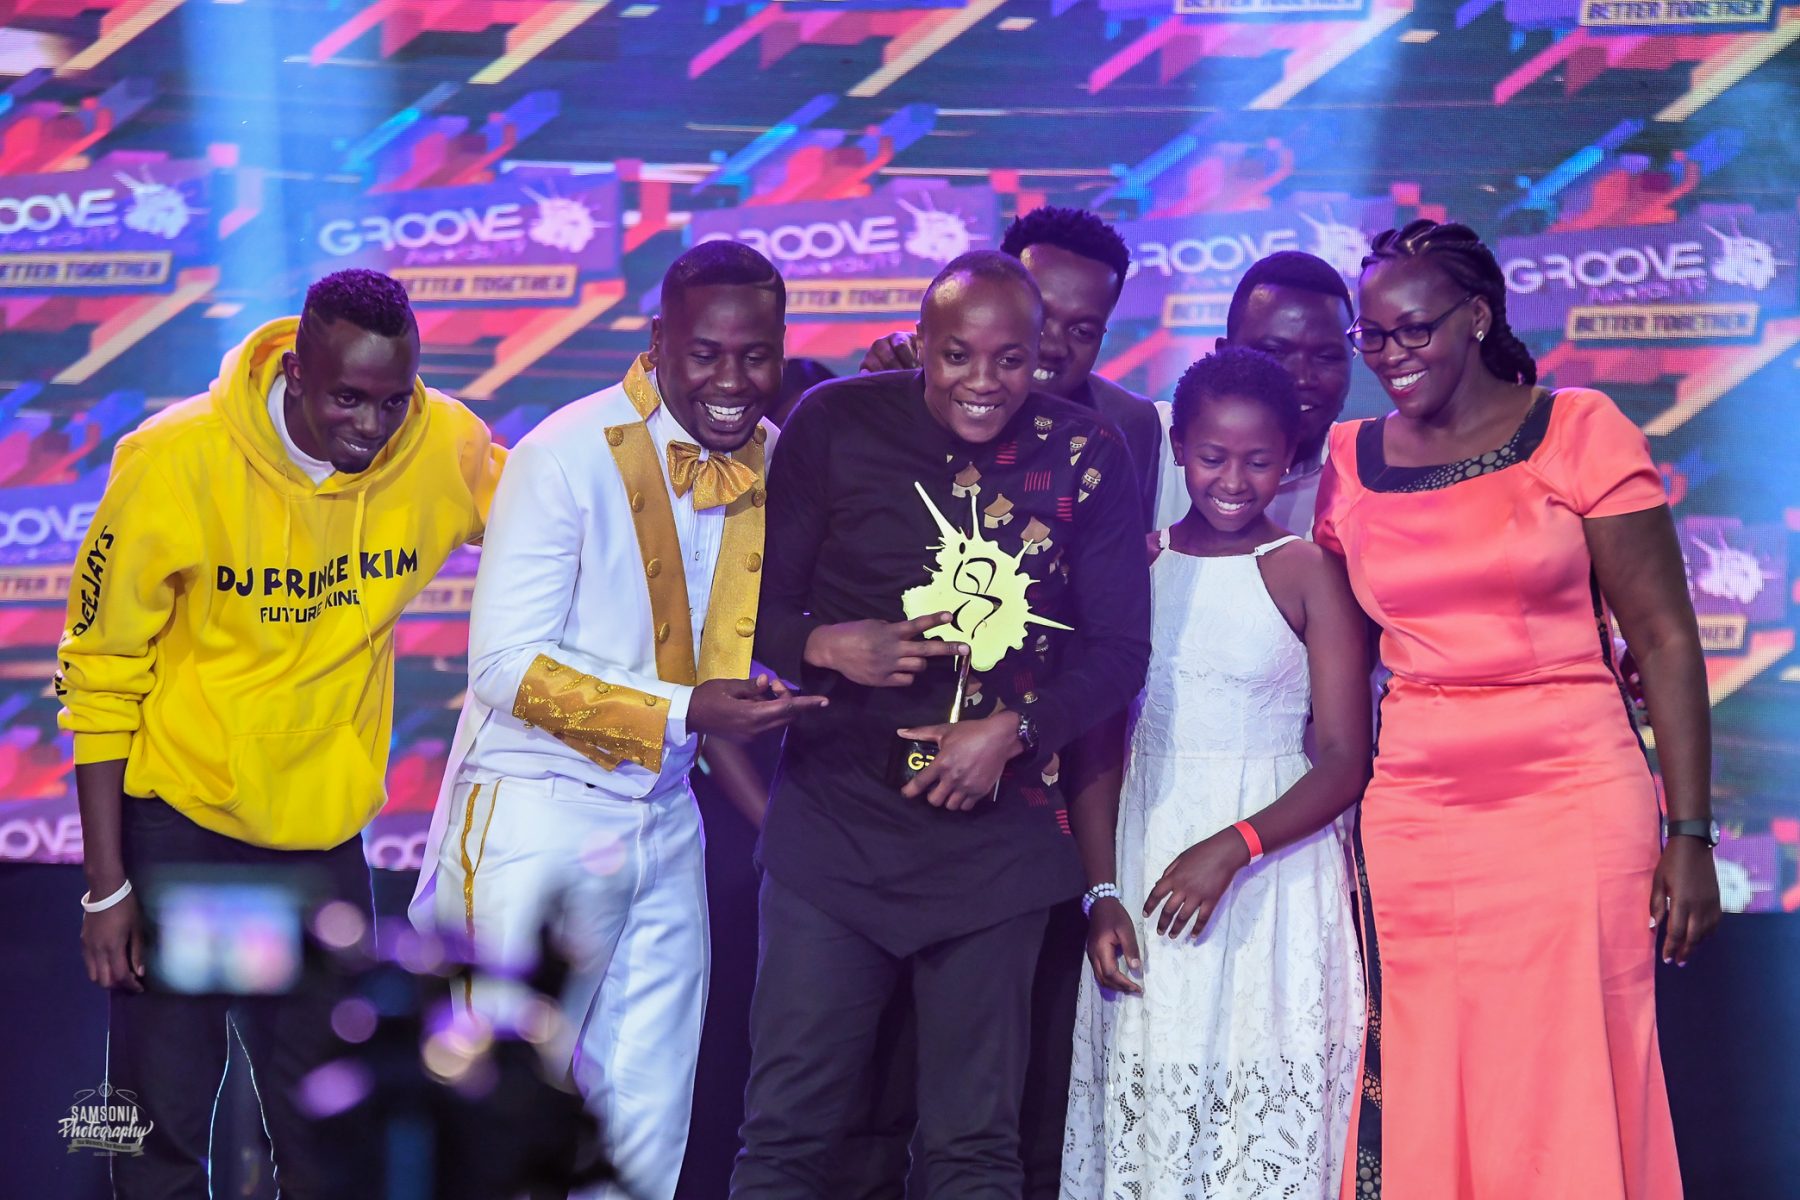 Groove Awards 2019